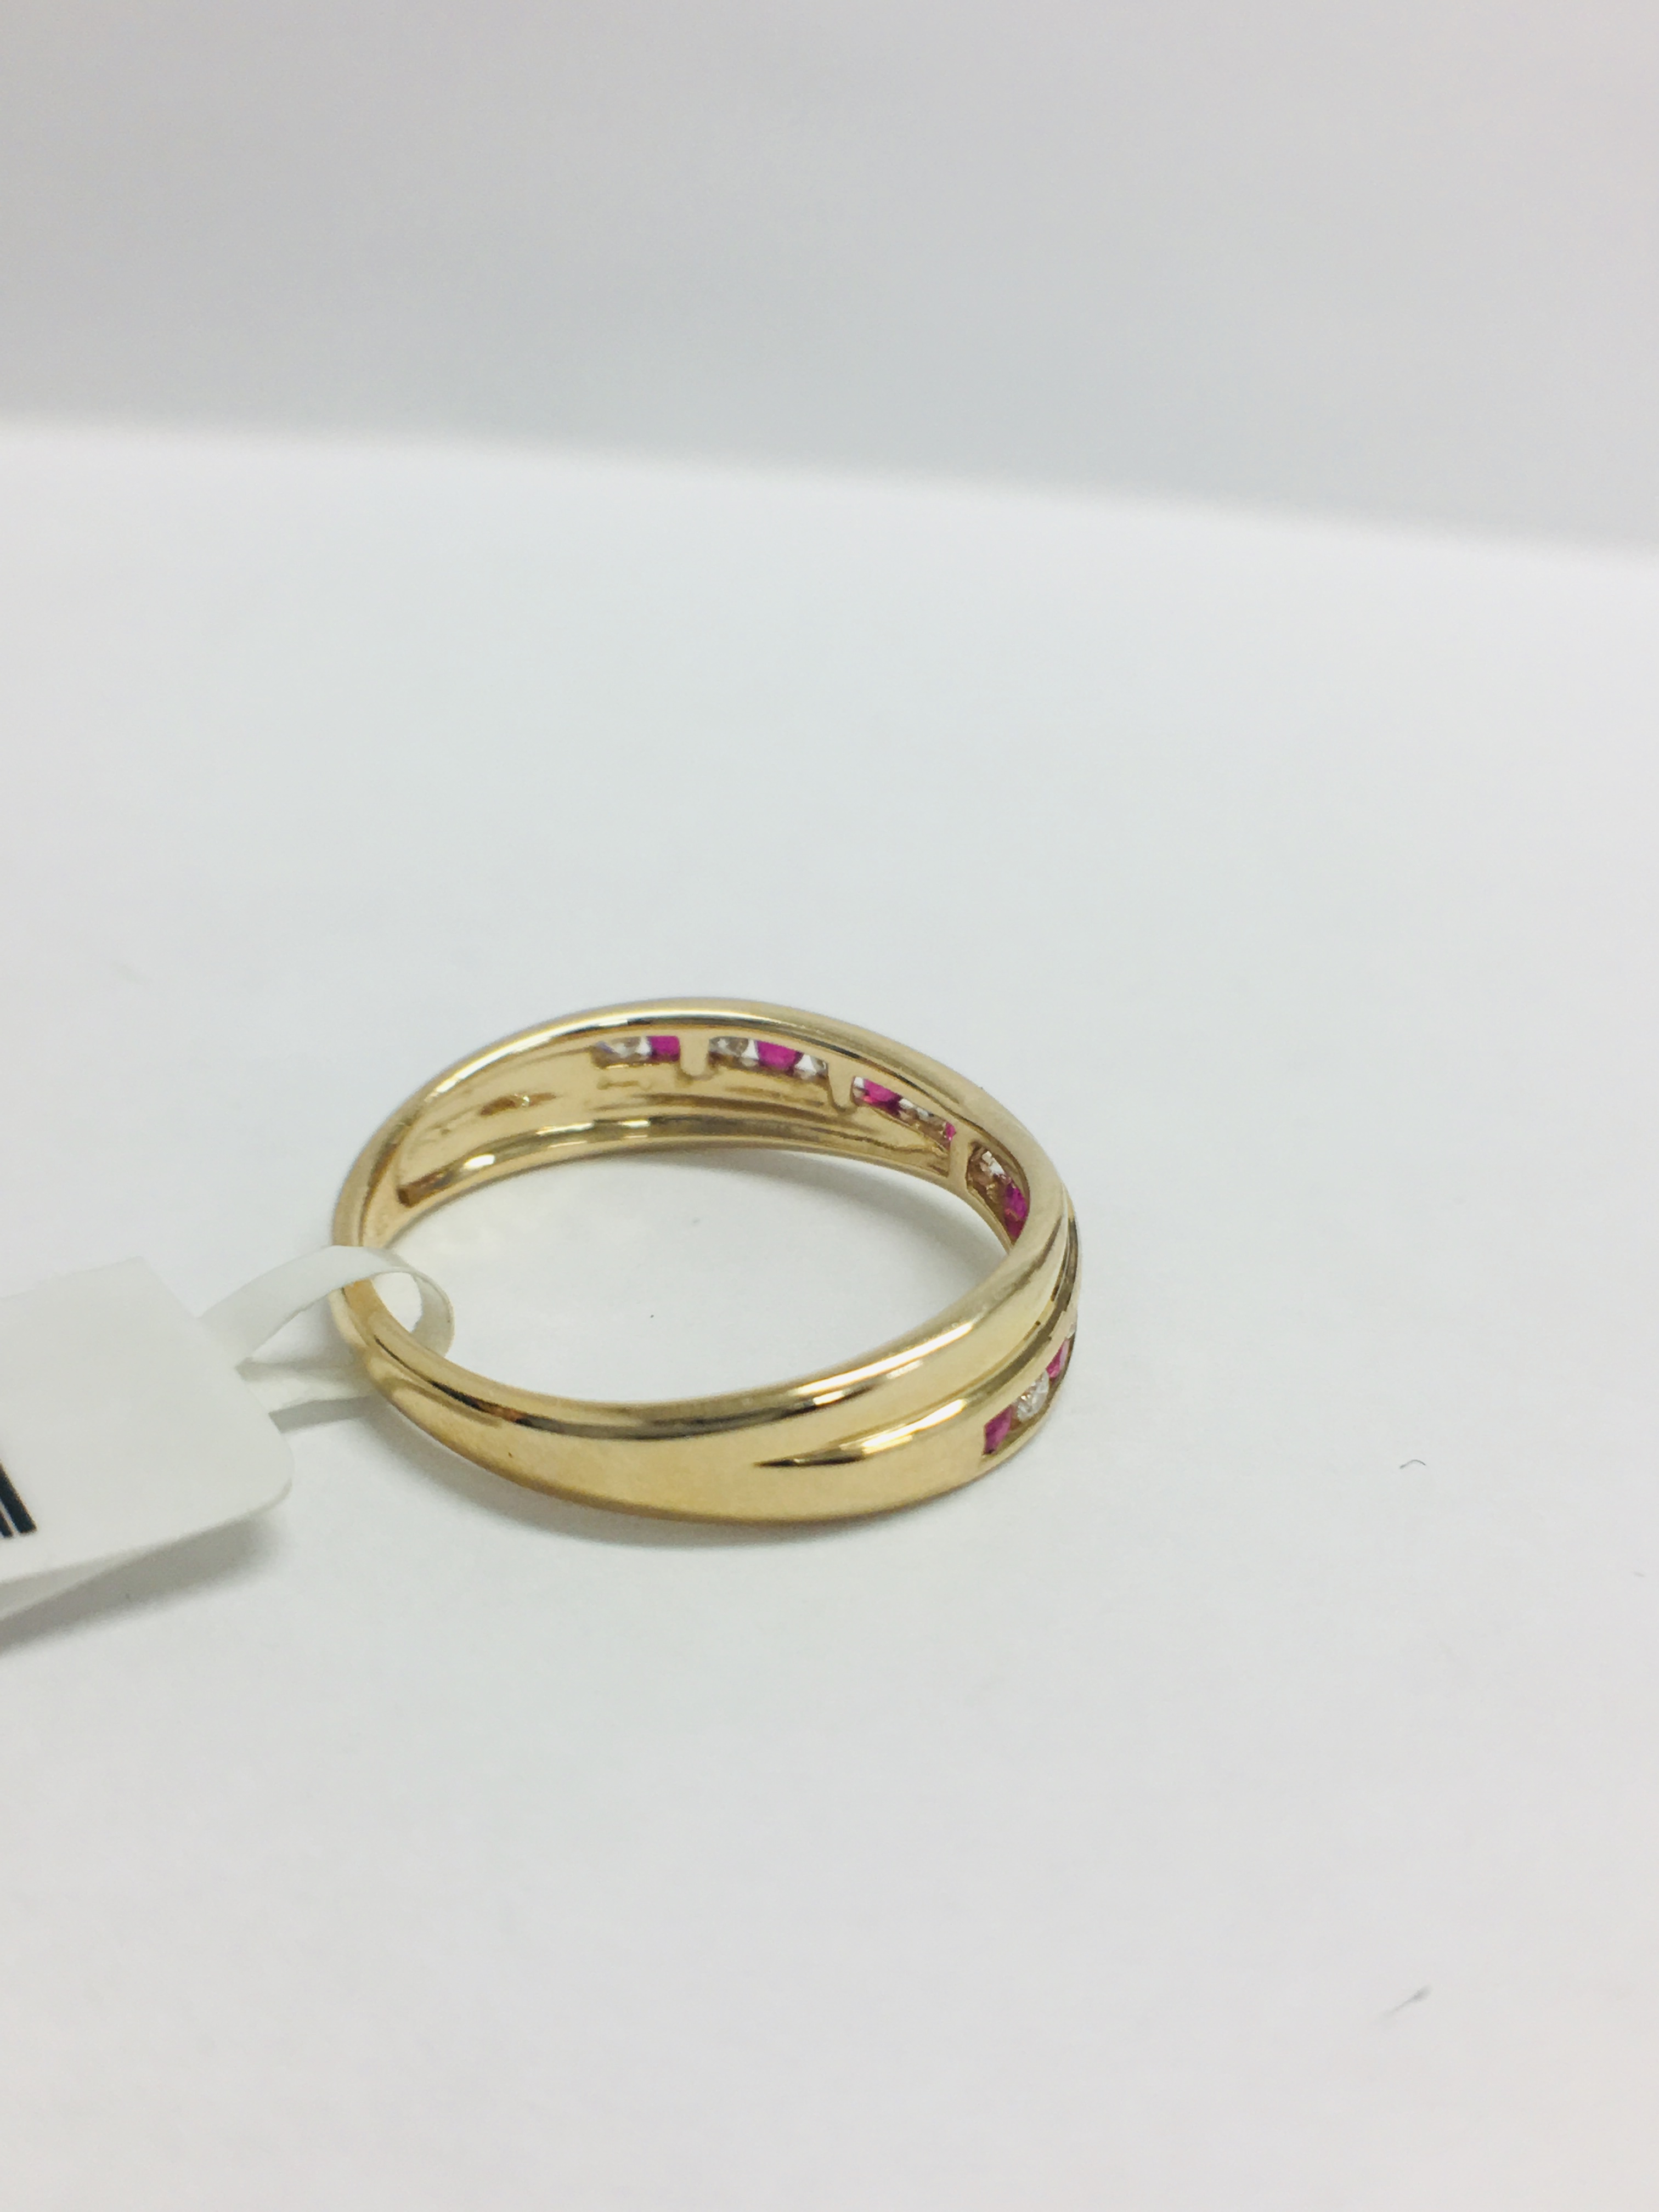 9Ct Yellow Gold Ruby Diamond Crossover Band Ring, - Image 5 of 8